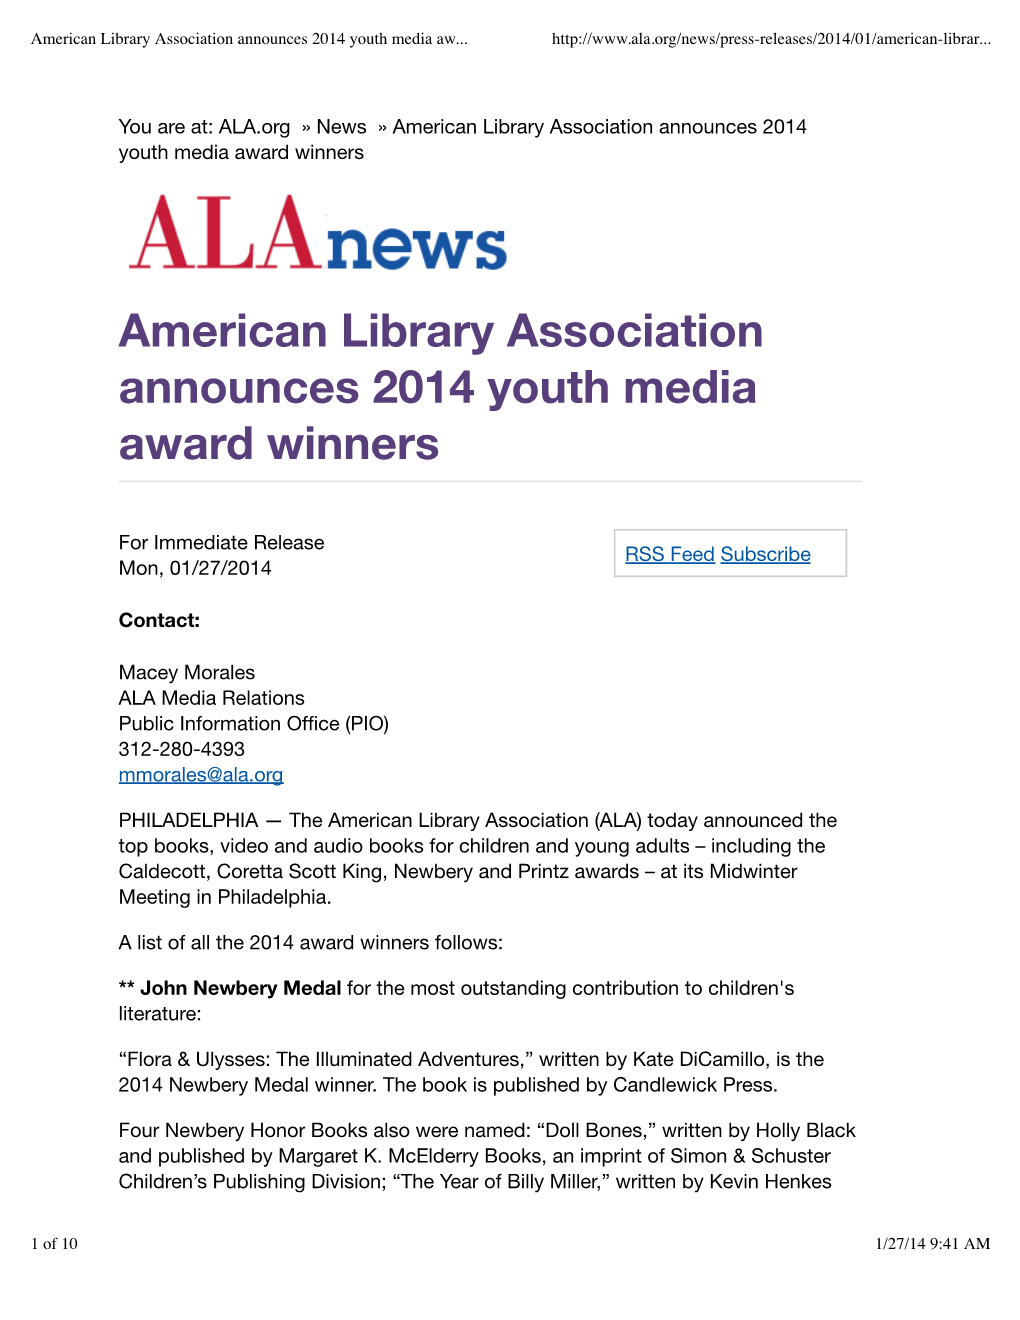 American Library Association Announces 2014 Youth Media Aw